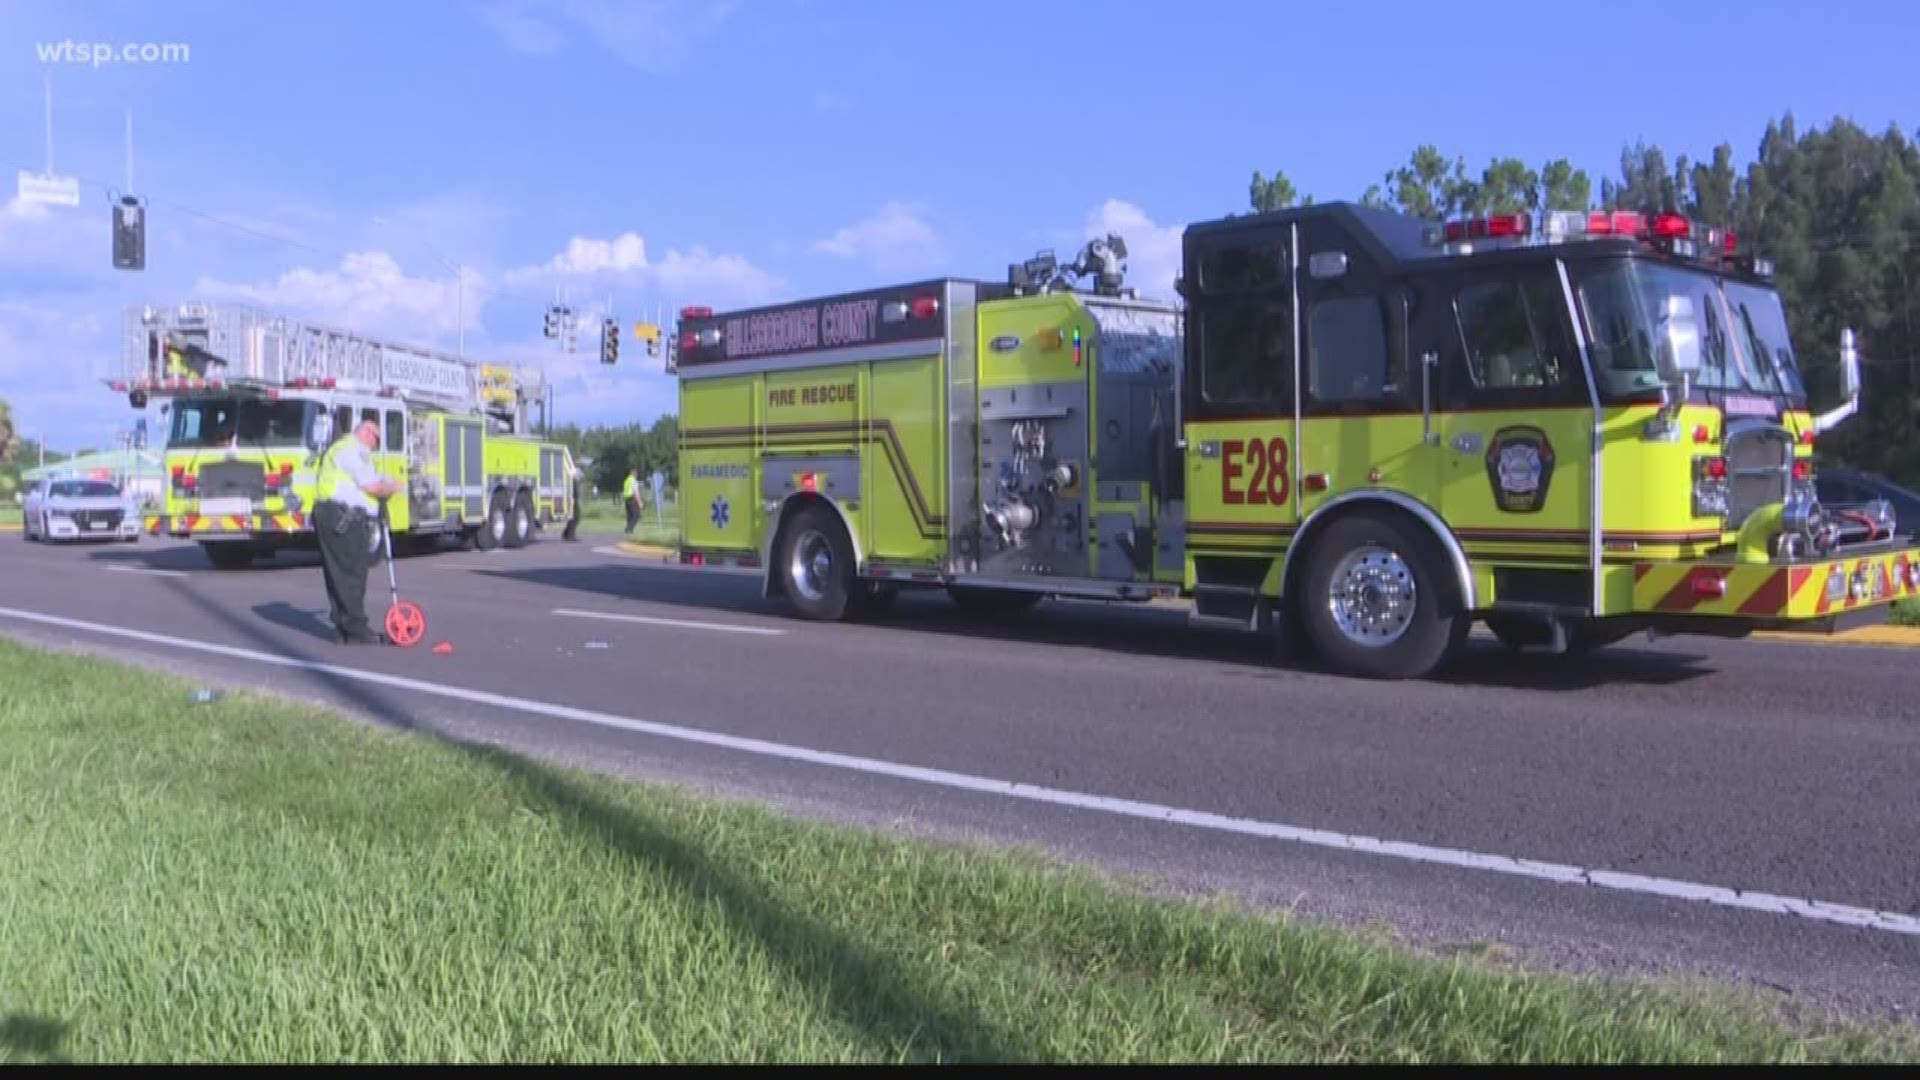 It's a dire warning from Hillsborough County firefighters: They say response rates are not where they need to be.